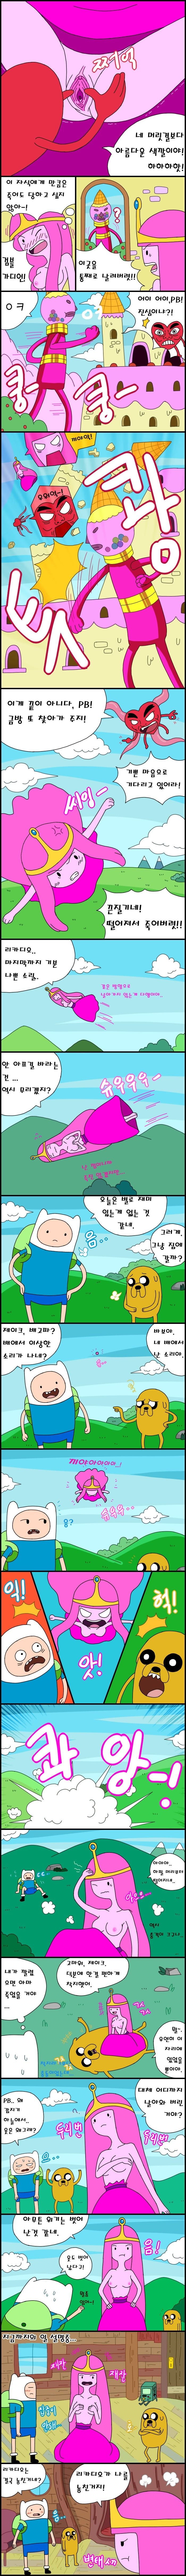 Adventure TIme Adult Time 2 